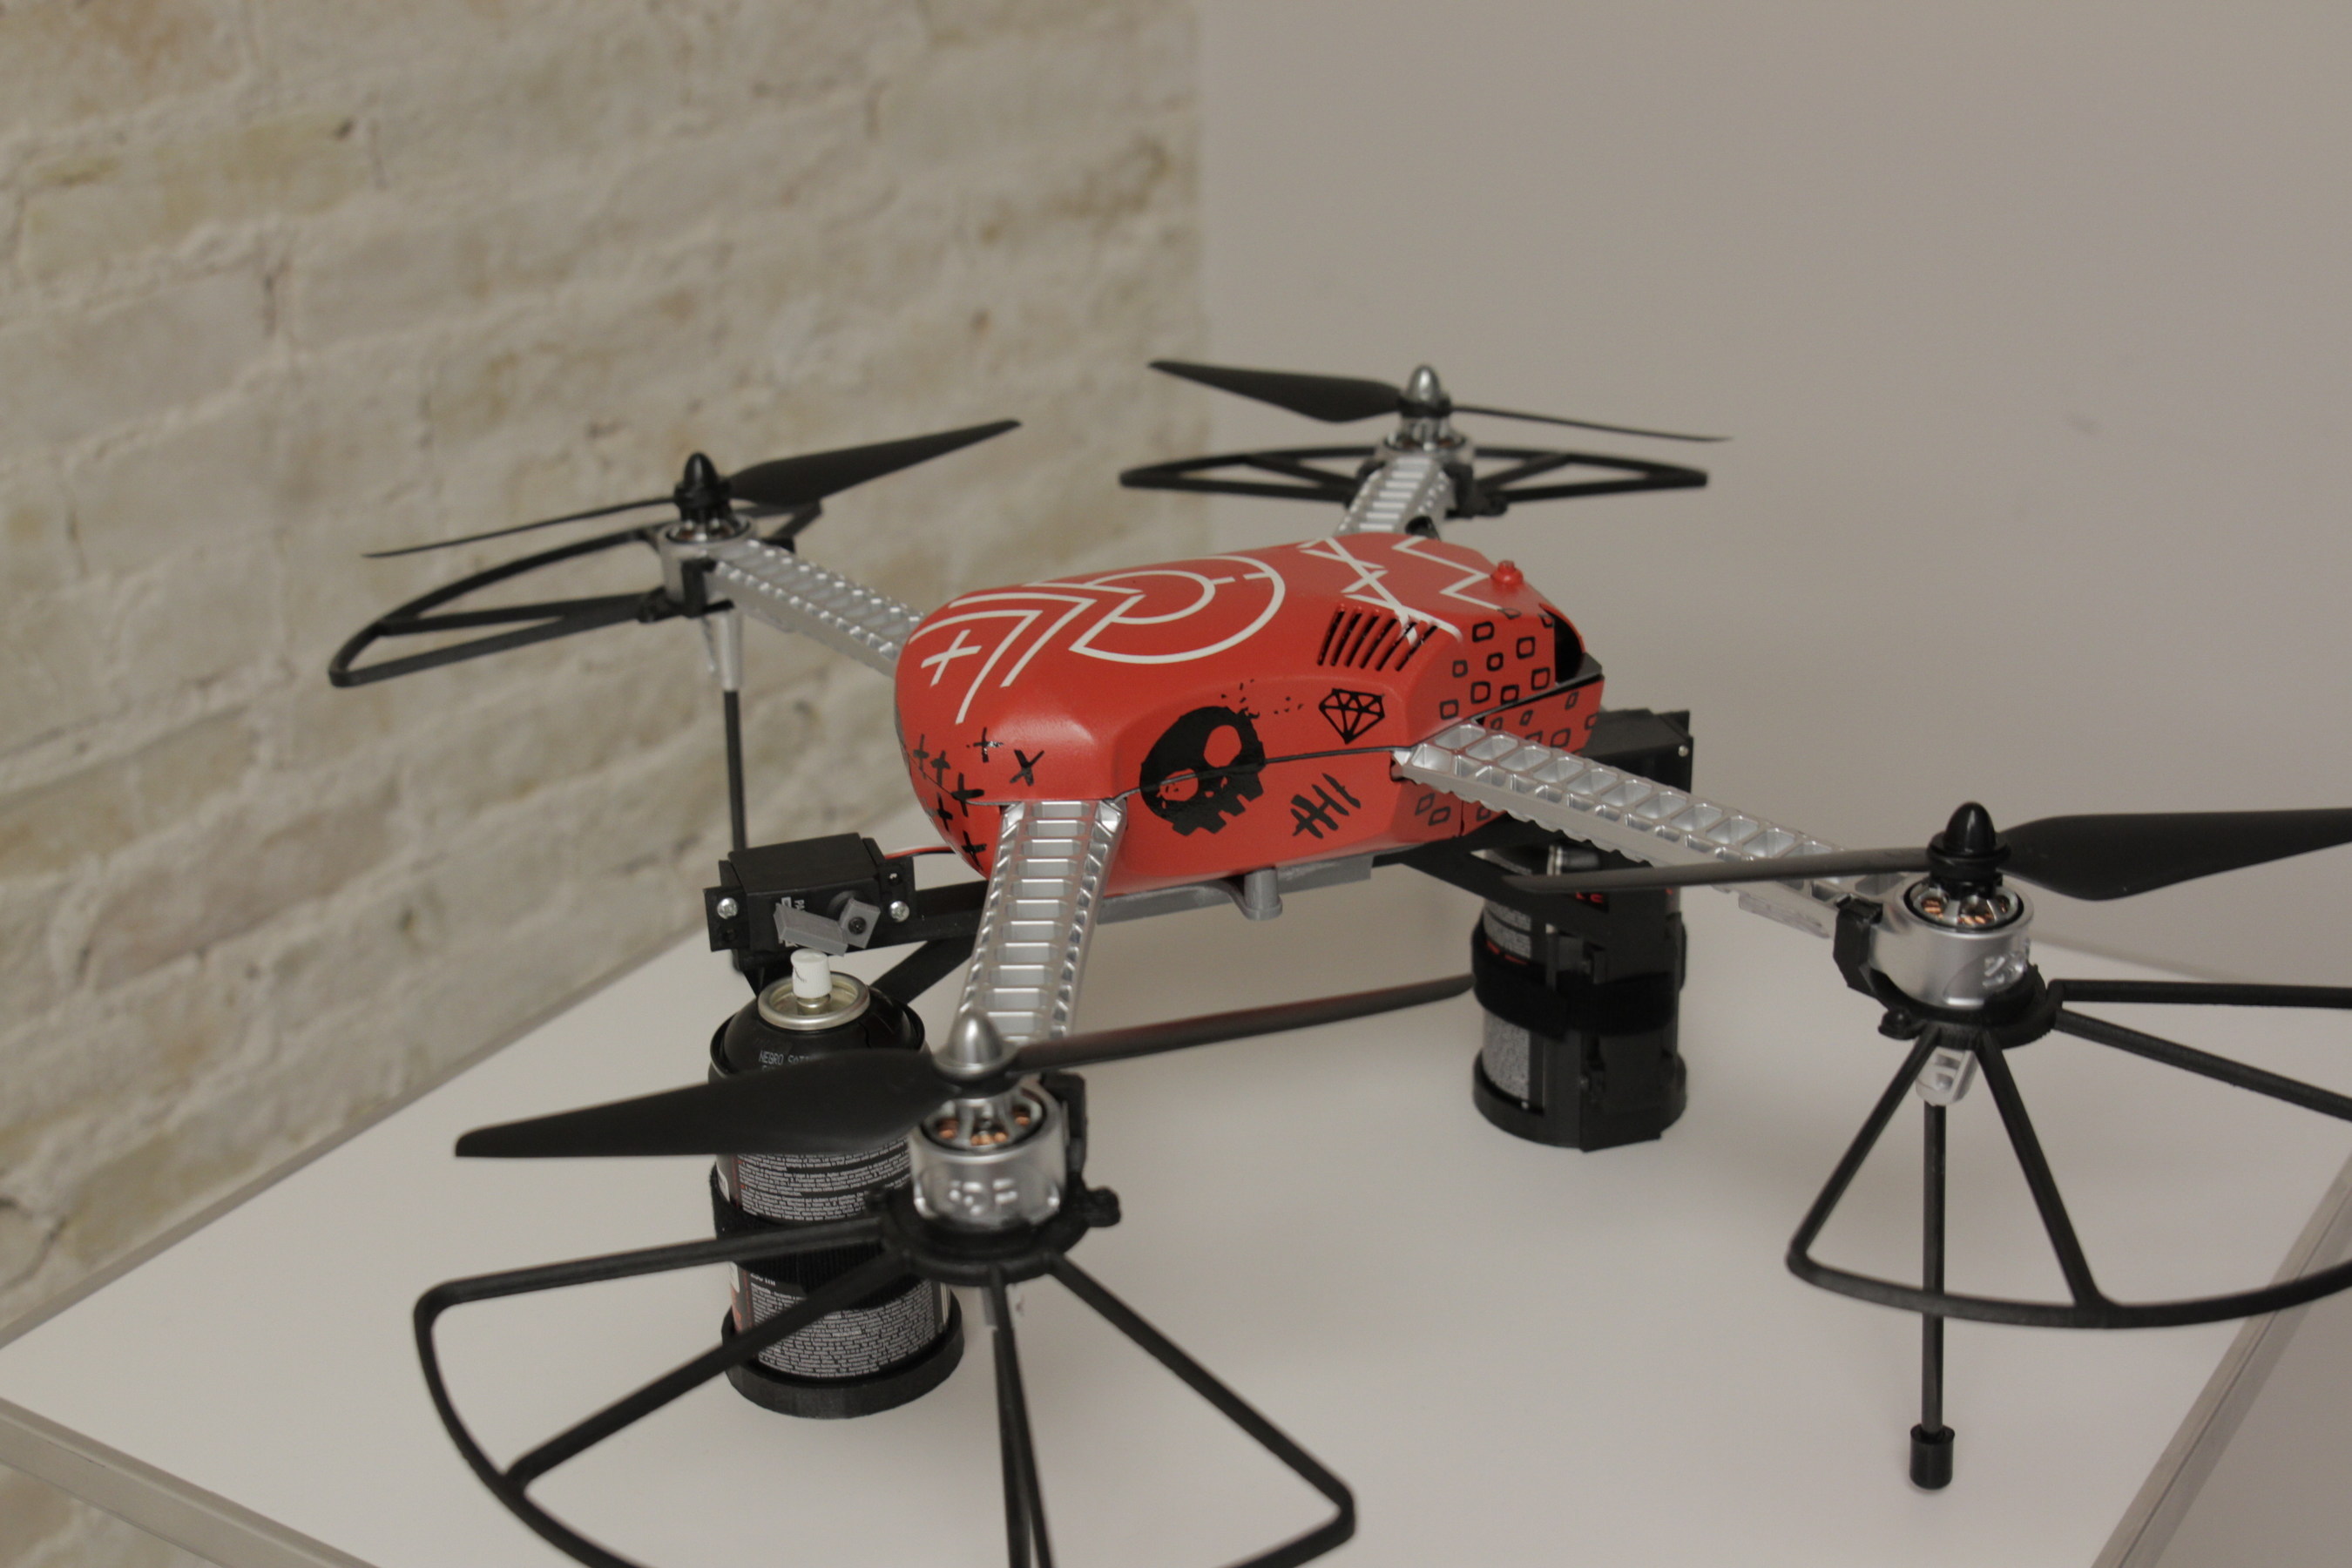 Chaotic Moon's Drone Tyrone outfitted with spray paint cans